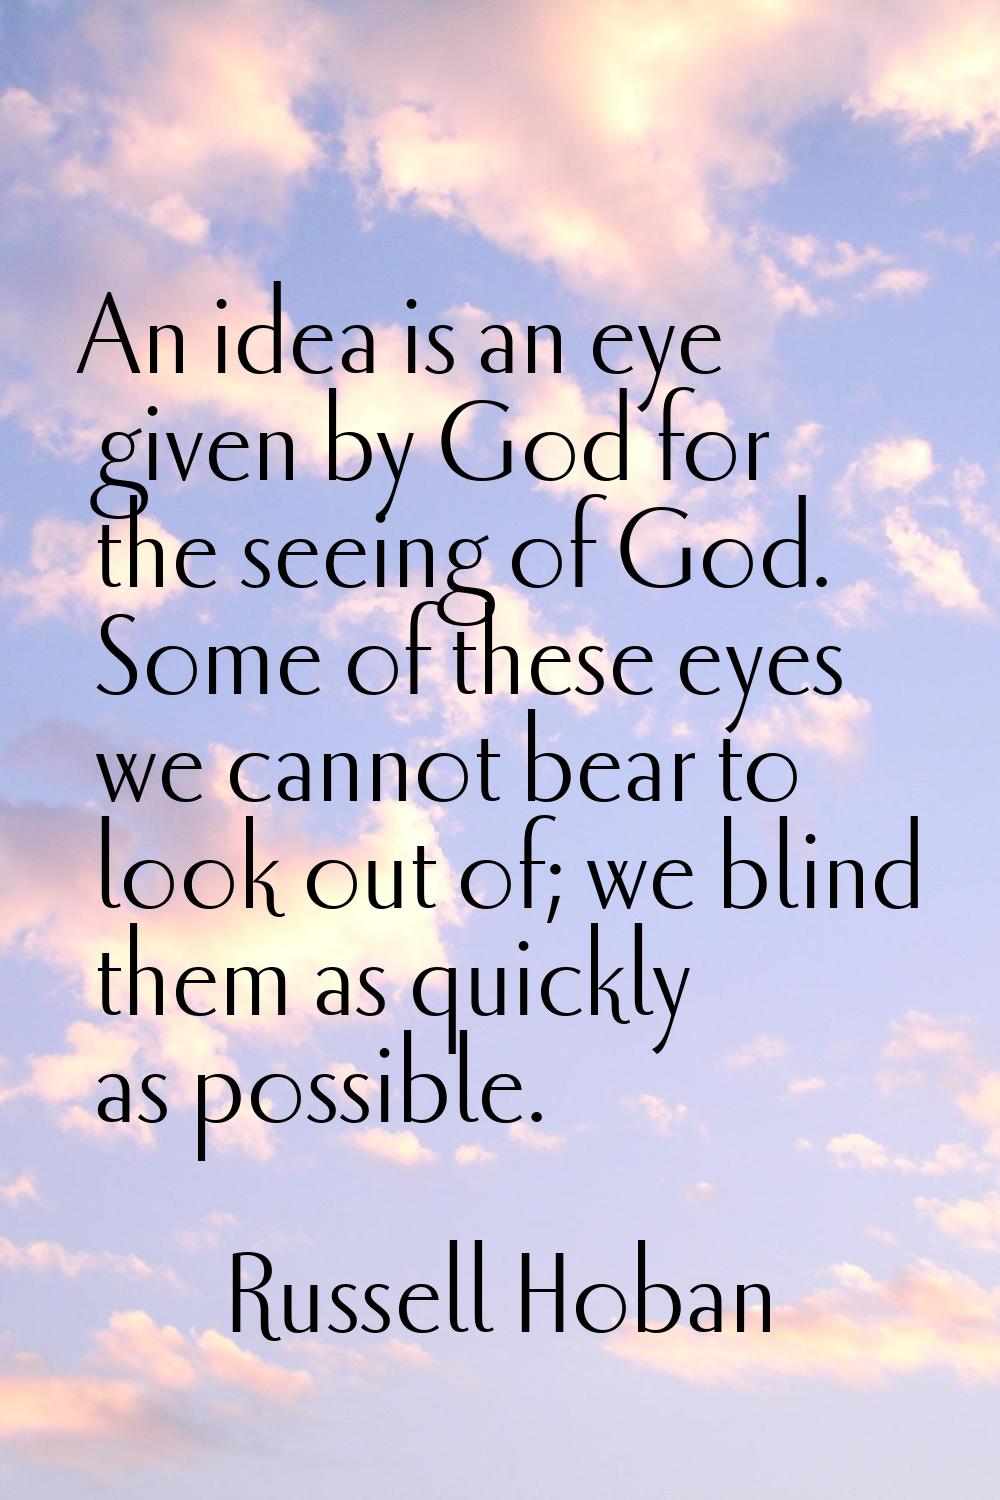 An idea is an eye given by God for the seeing of God. Some of these eyes we cannot bear to look out